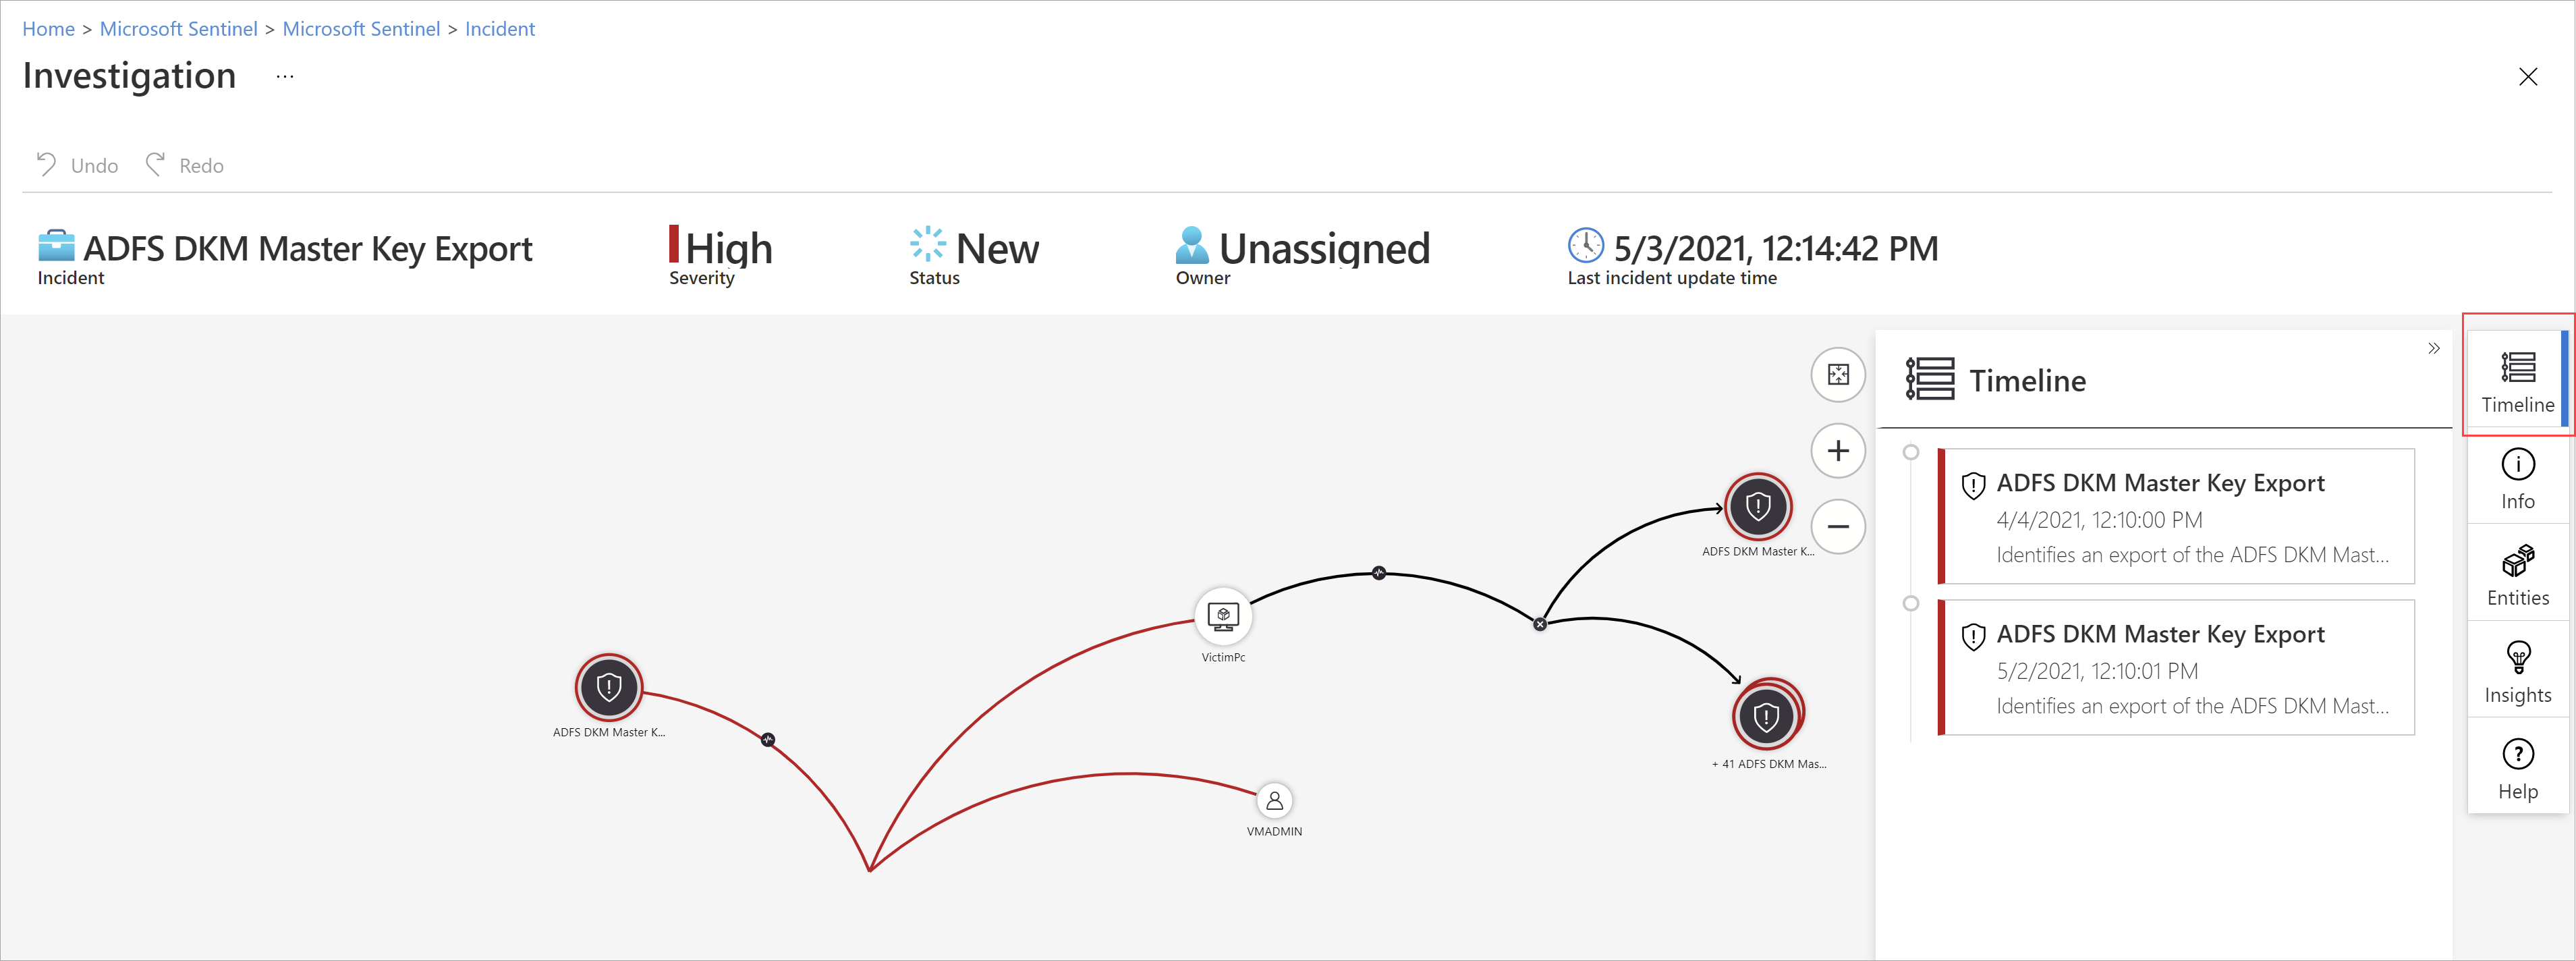 Screenshot of an incident investigation that shows an entity and connected entities in an interactive graph.